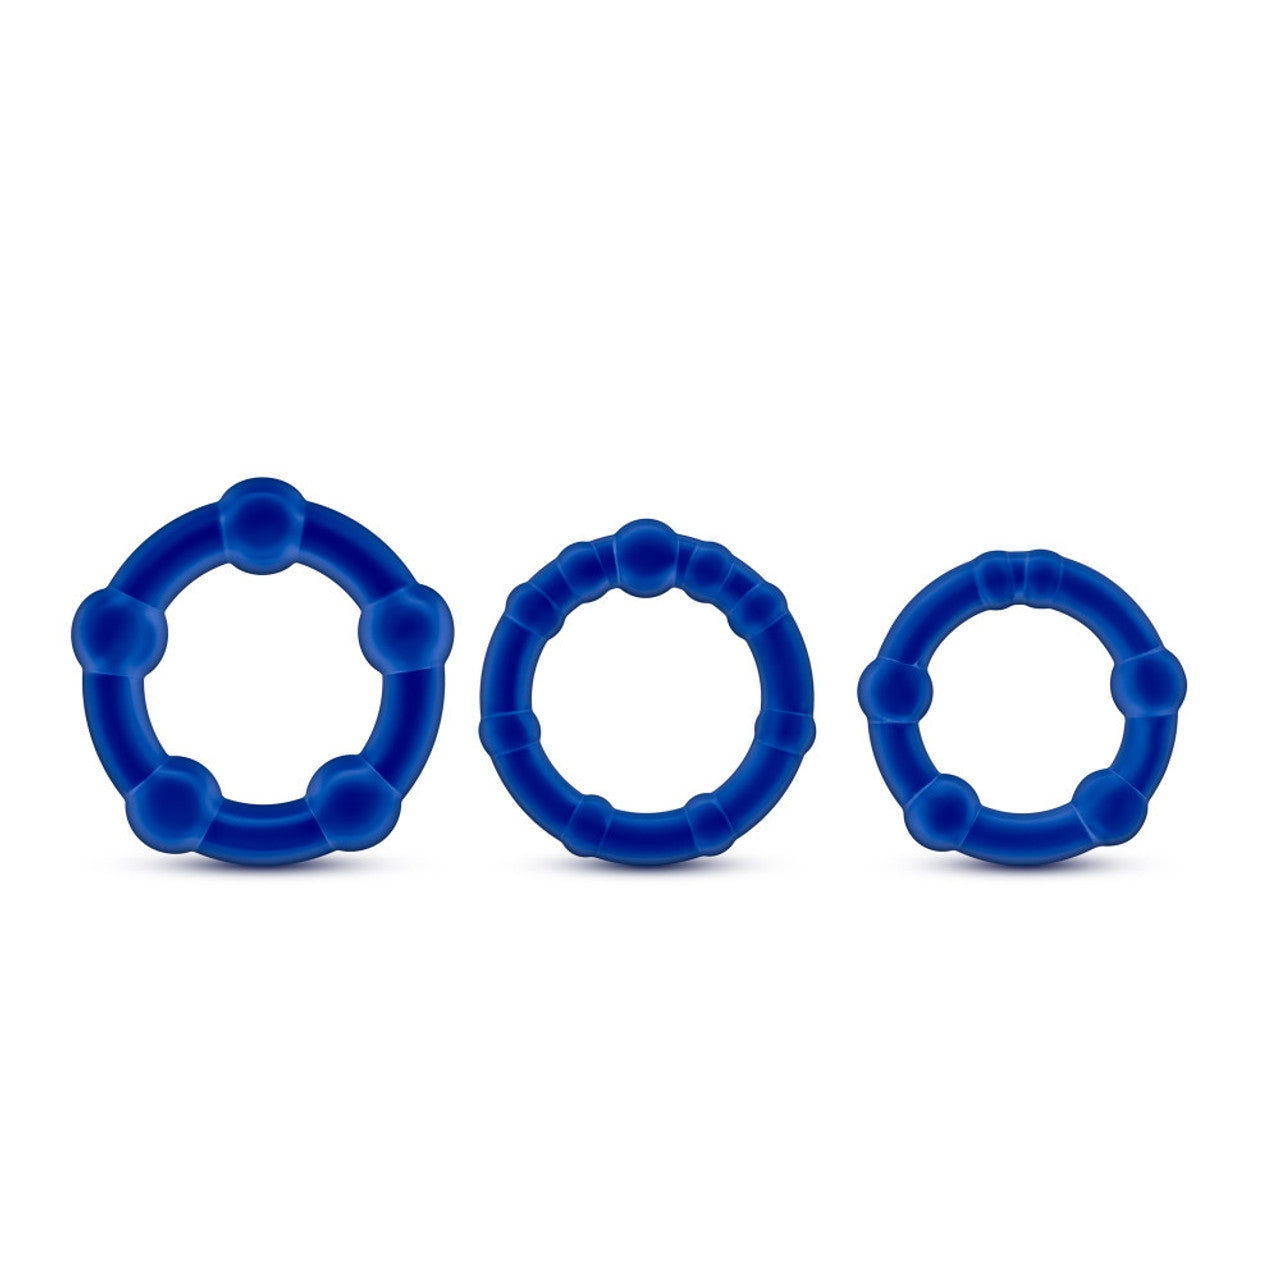 Blush Stay Hard Beaded Cock Rings 3 Pack - Blue